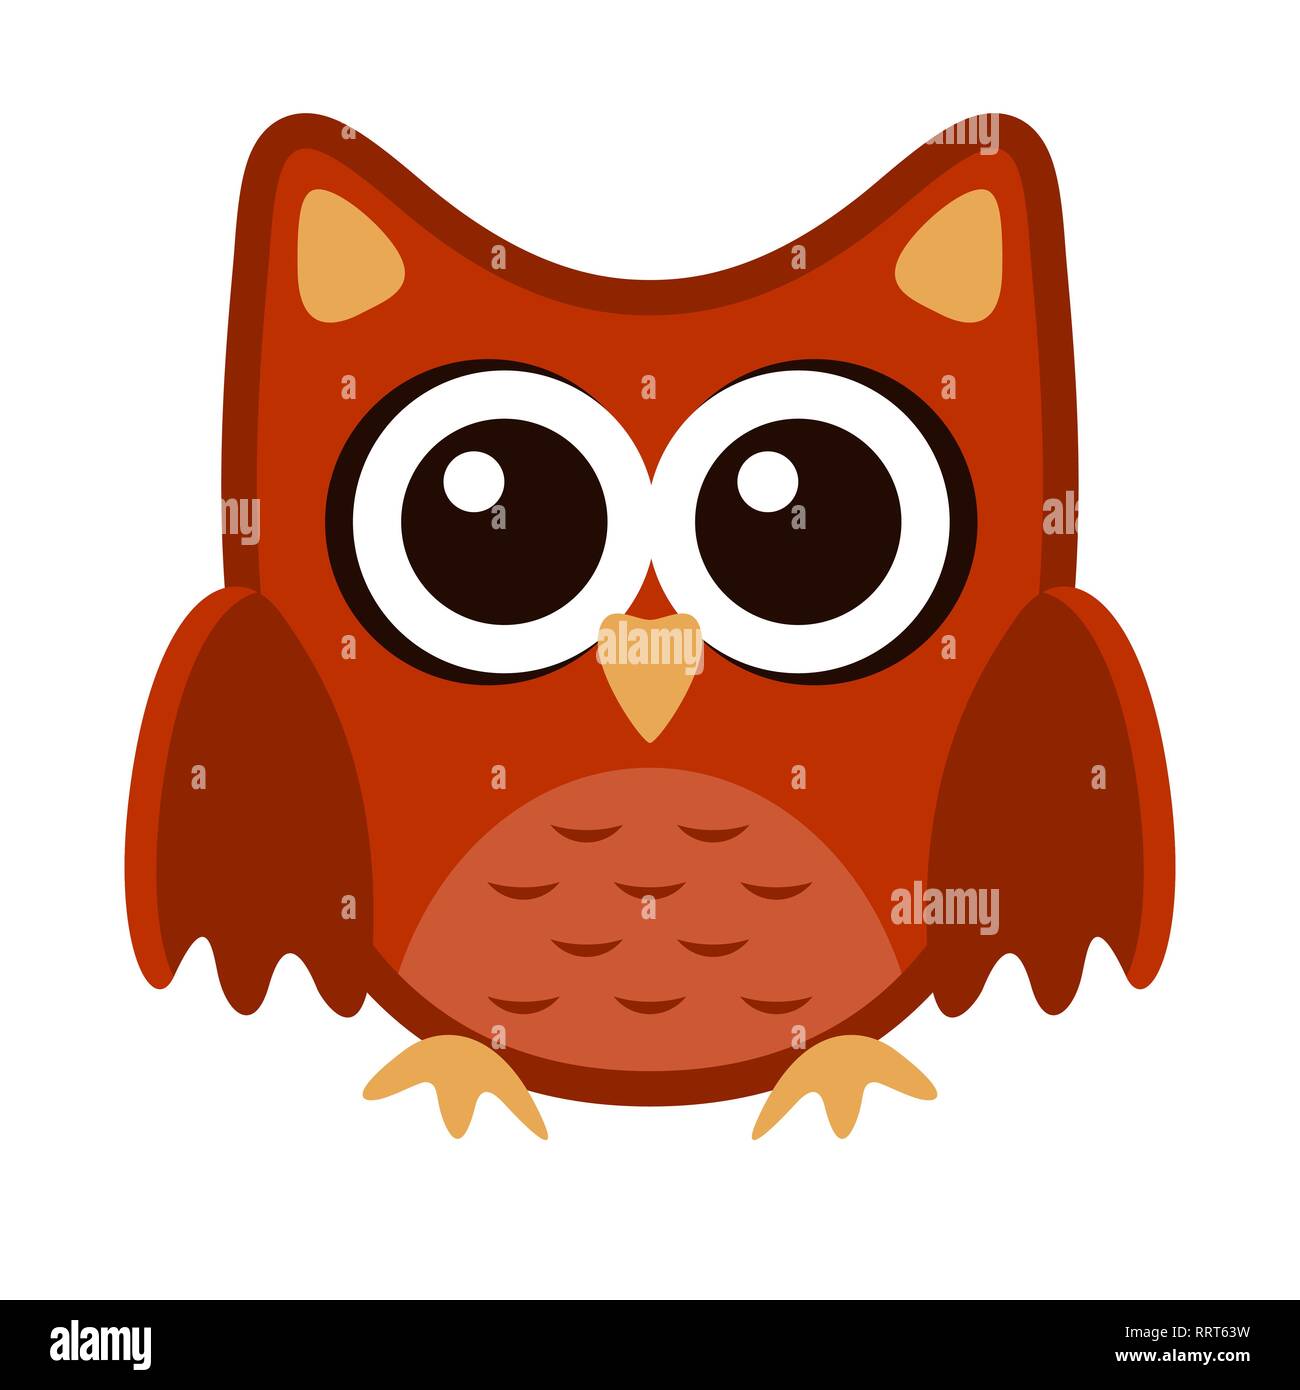 Owl funny stylized icon symbol brown orange colors Stock Vector